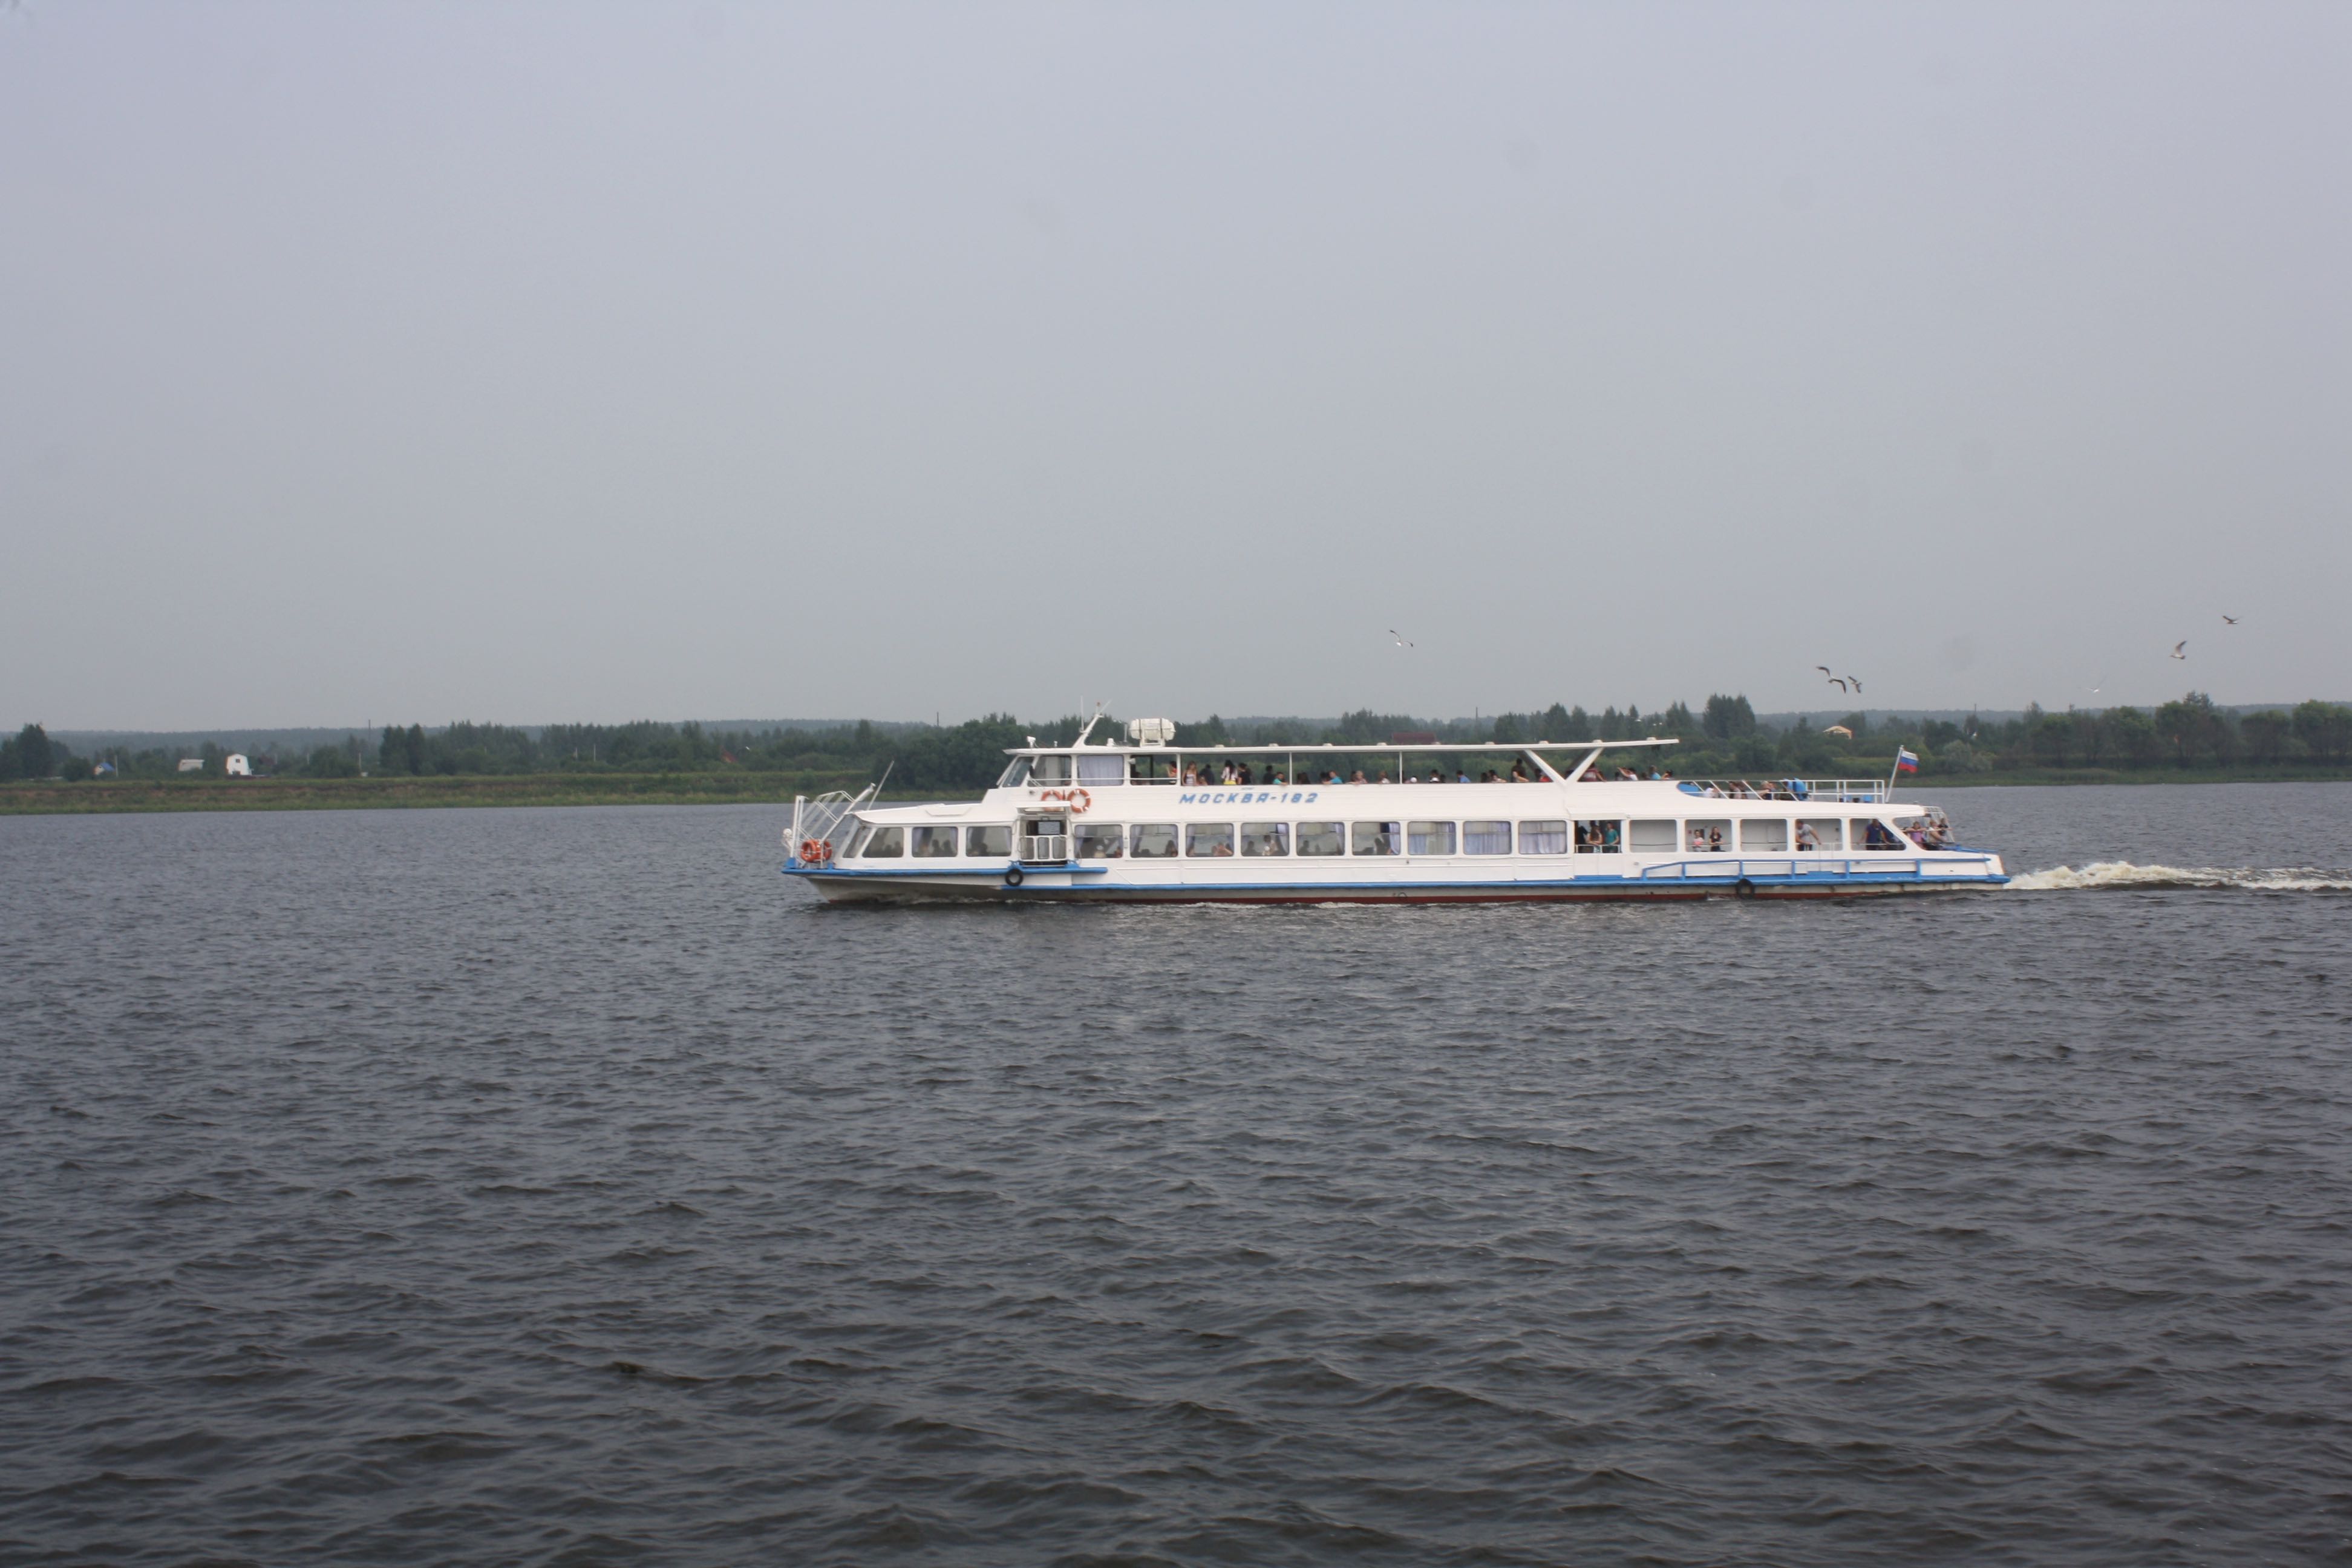 One of the favorite pastimes of Yaroslavl residents is cruising or sailing on the Volga.